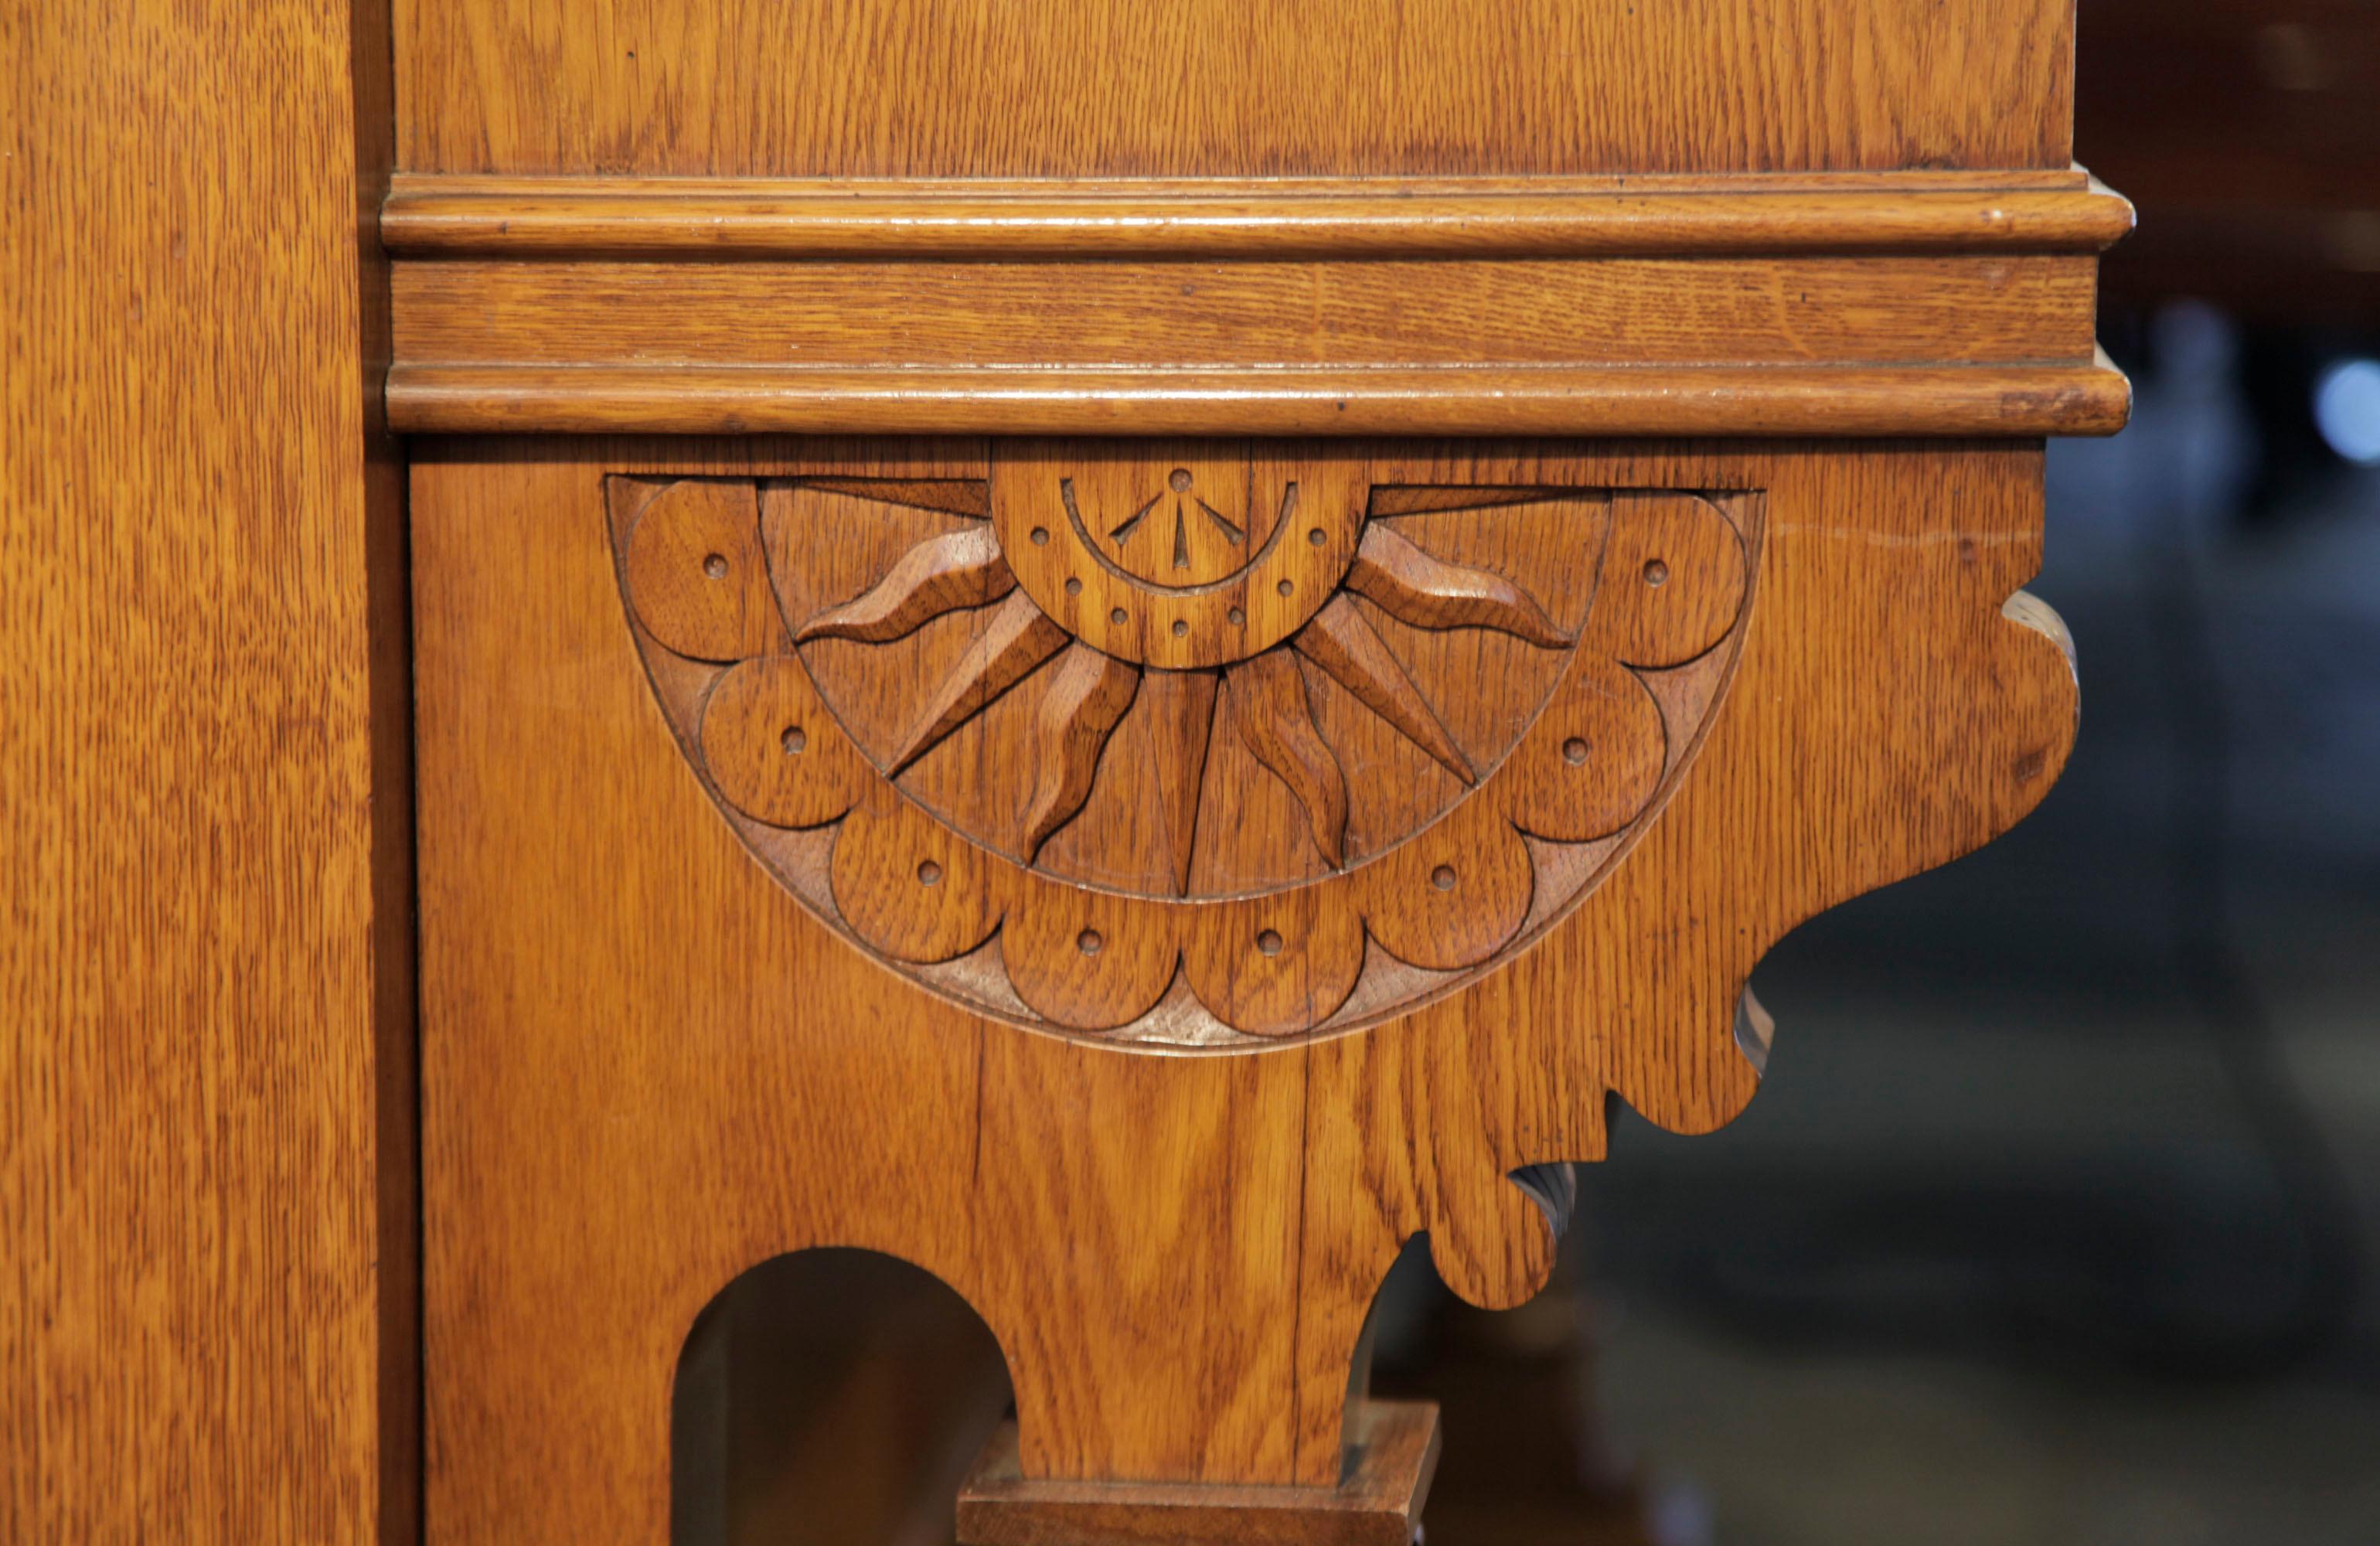 19th Century English Gothic Style Ibach Upright Piano Carved Oak Traditional Folk Art Motifs For Sale